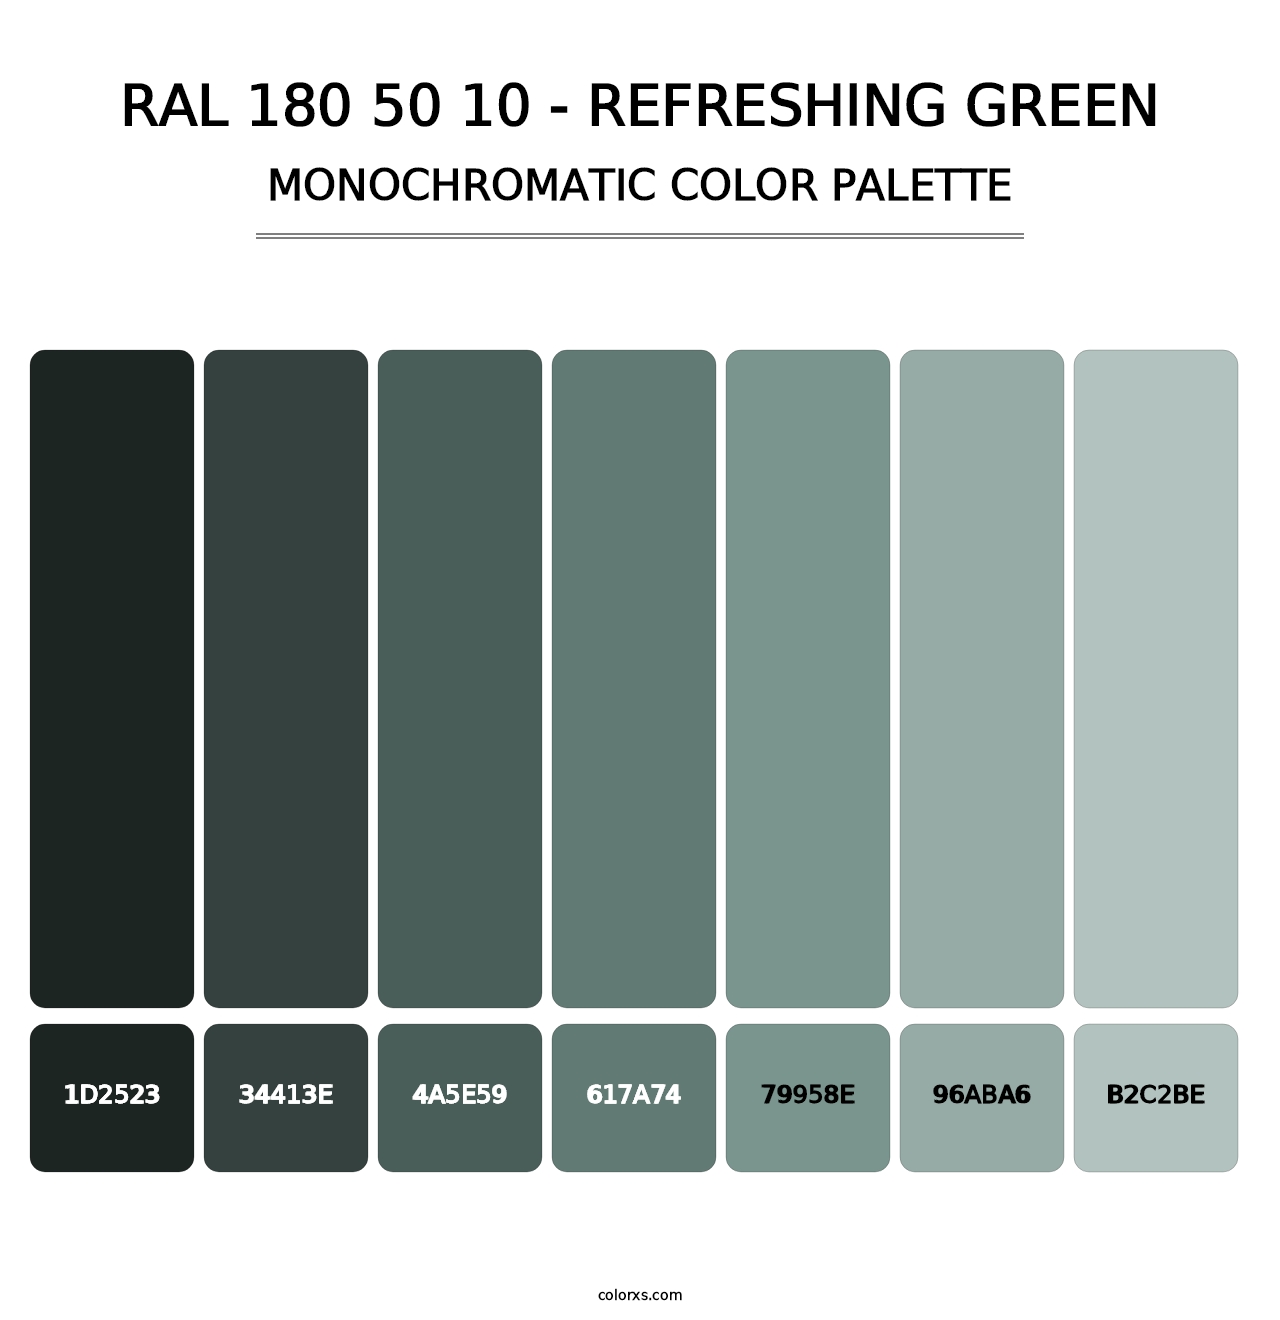 RAL 180 50 10 - Refreshing Green - Monochromatic Color Palette